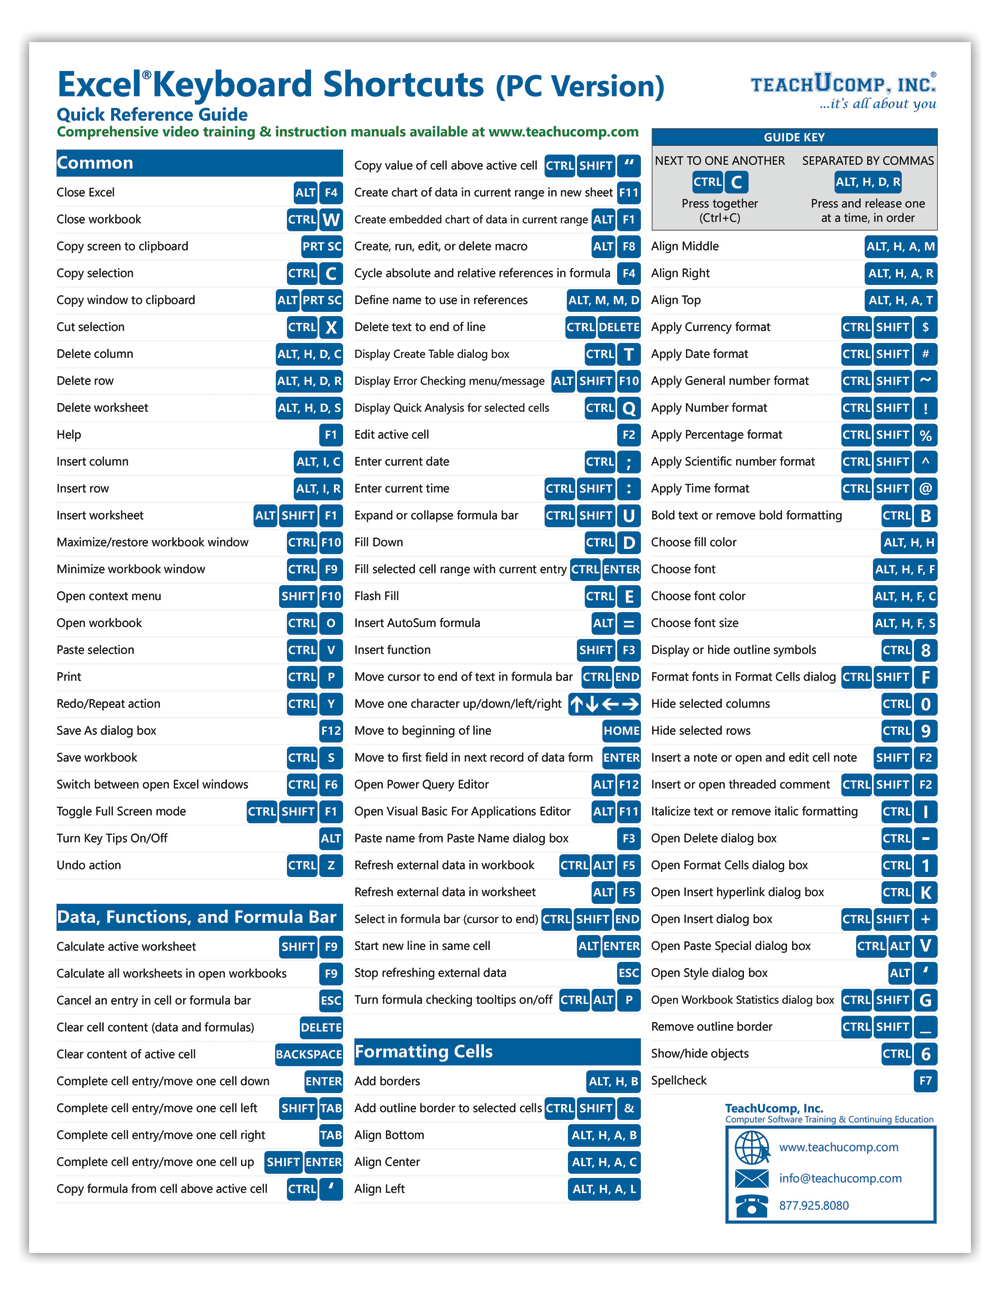 Excel (PC/Windows) Keyboard Shortcuts Quick Reference Guide